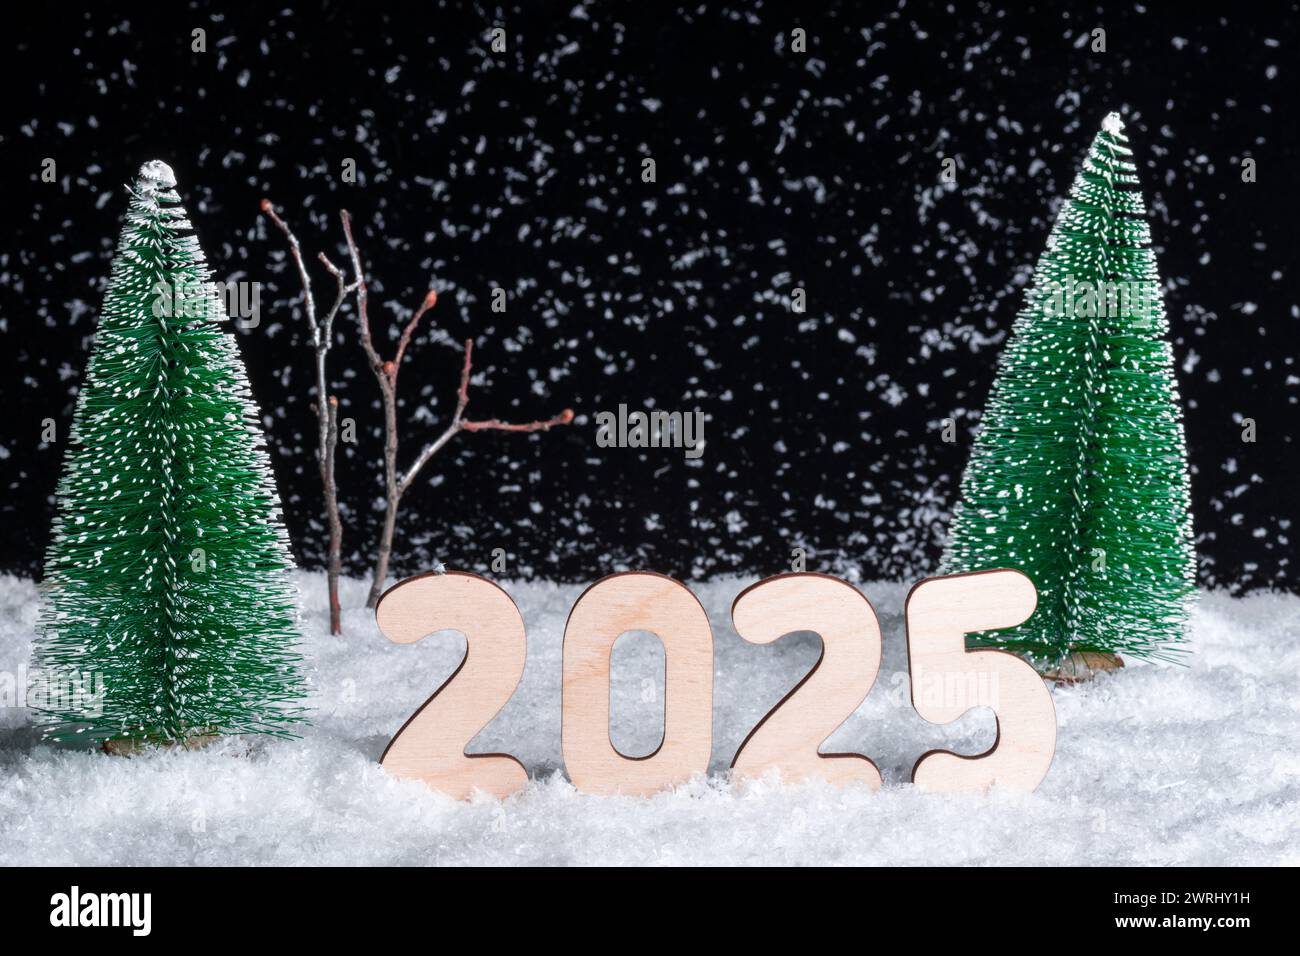 Creative 2025 New Year's card. A composition of wooden figures of the year 2025 in a snowy forest during a snowfall Stock Photo